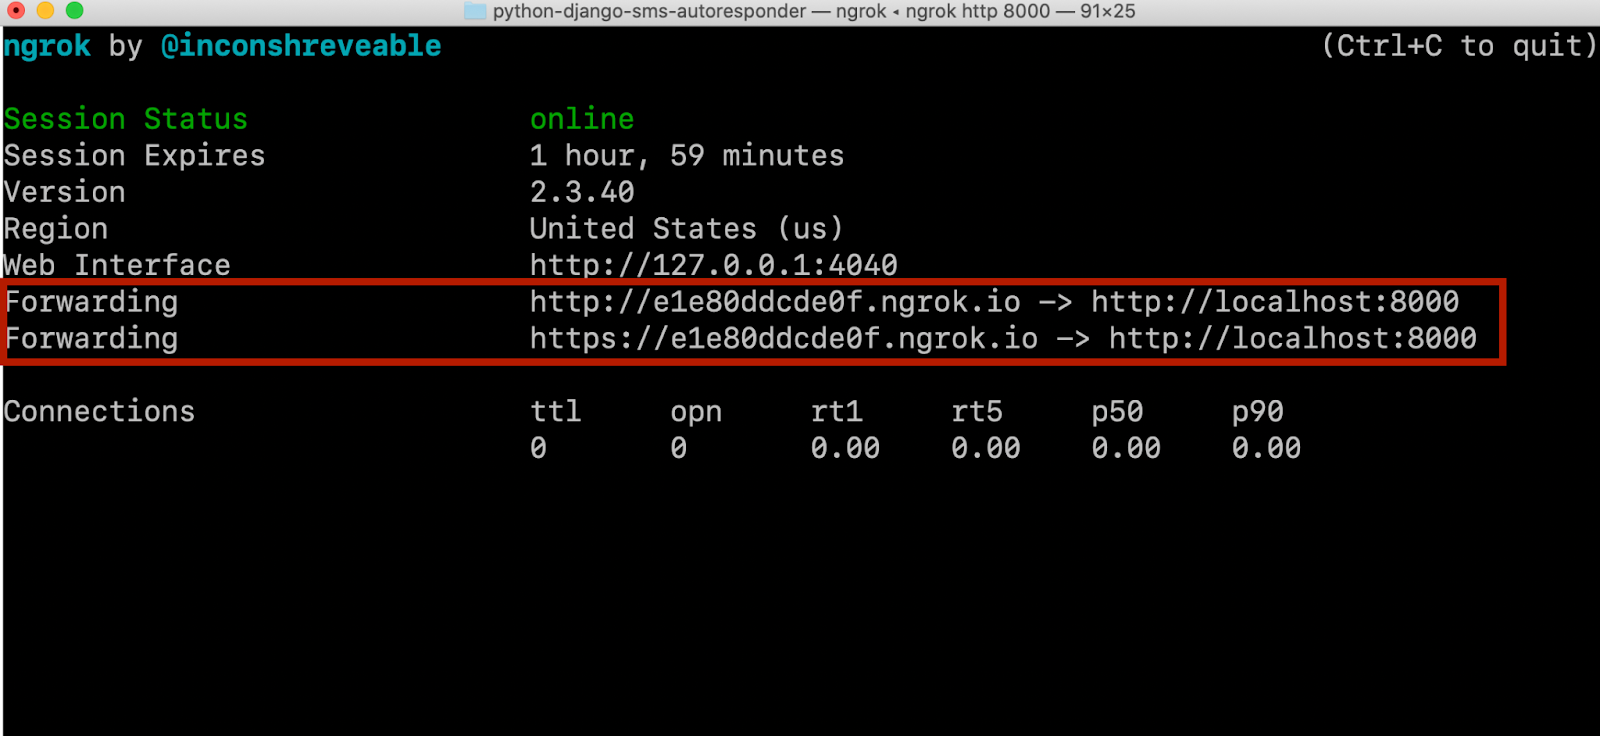 A screenshot of the CLI window in which ngrok is running. The forwarding URLs provided by ngrok are visible.